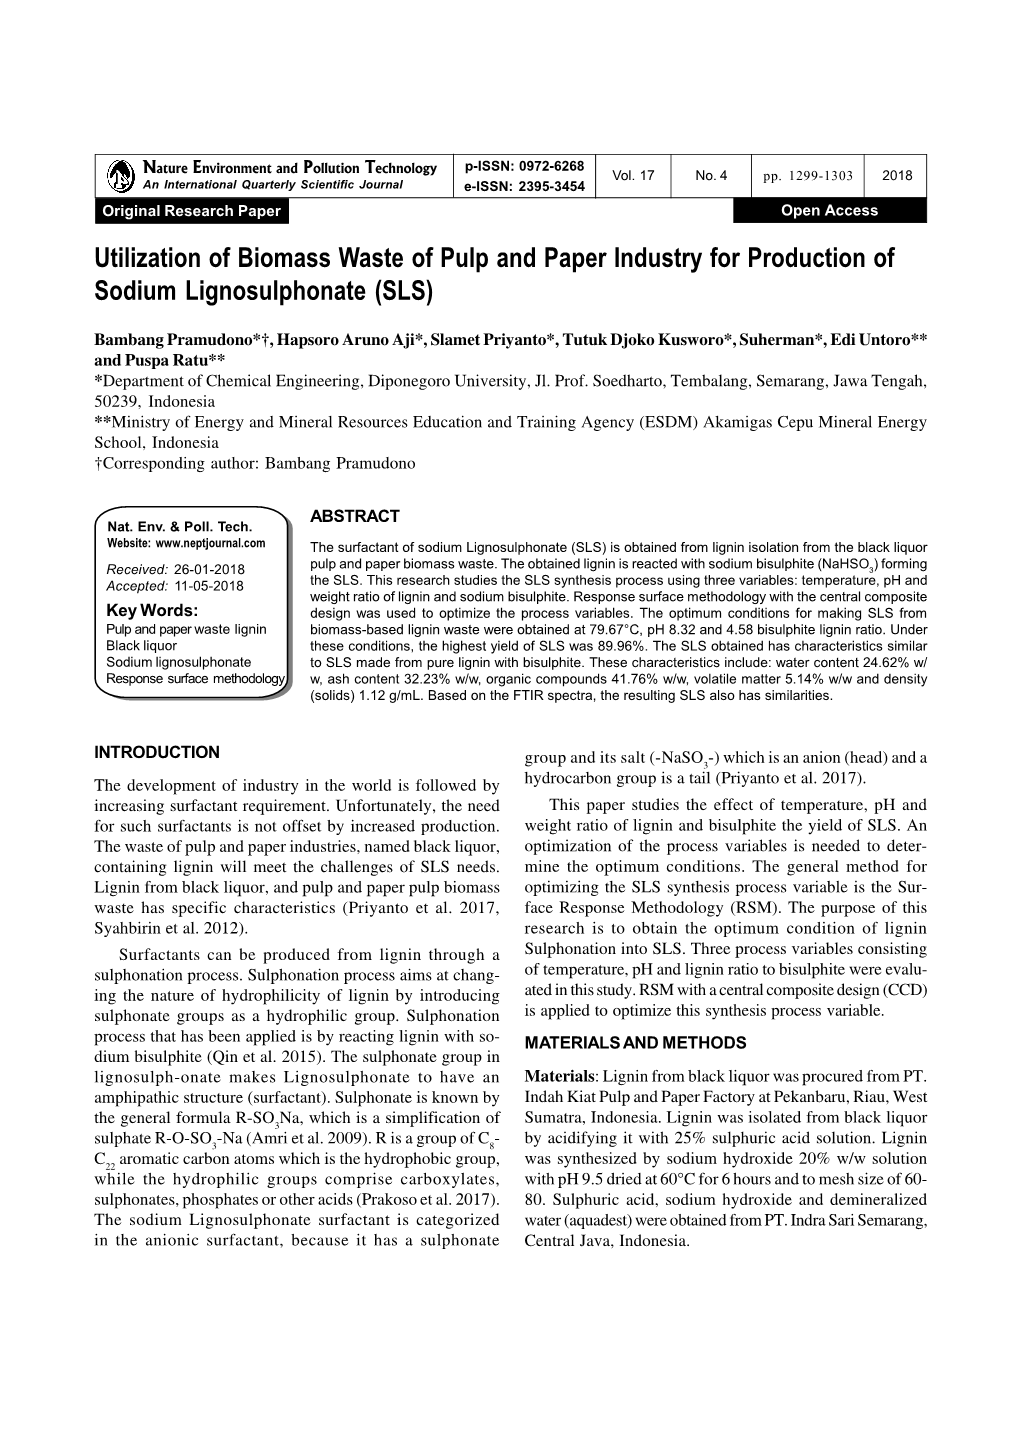 Utilization of Biomass Waste of Pulp and Paper Industry for Production of Sodium Lignosulphonate (SLS)